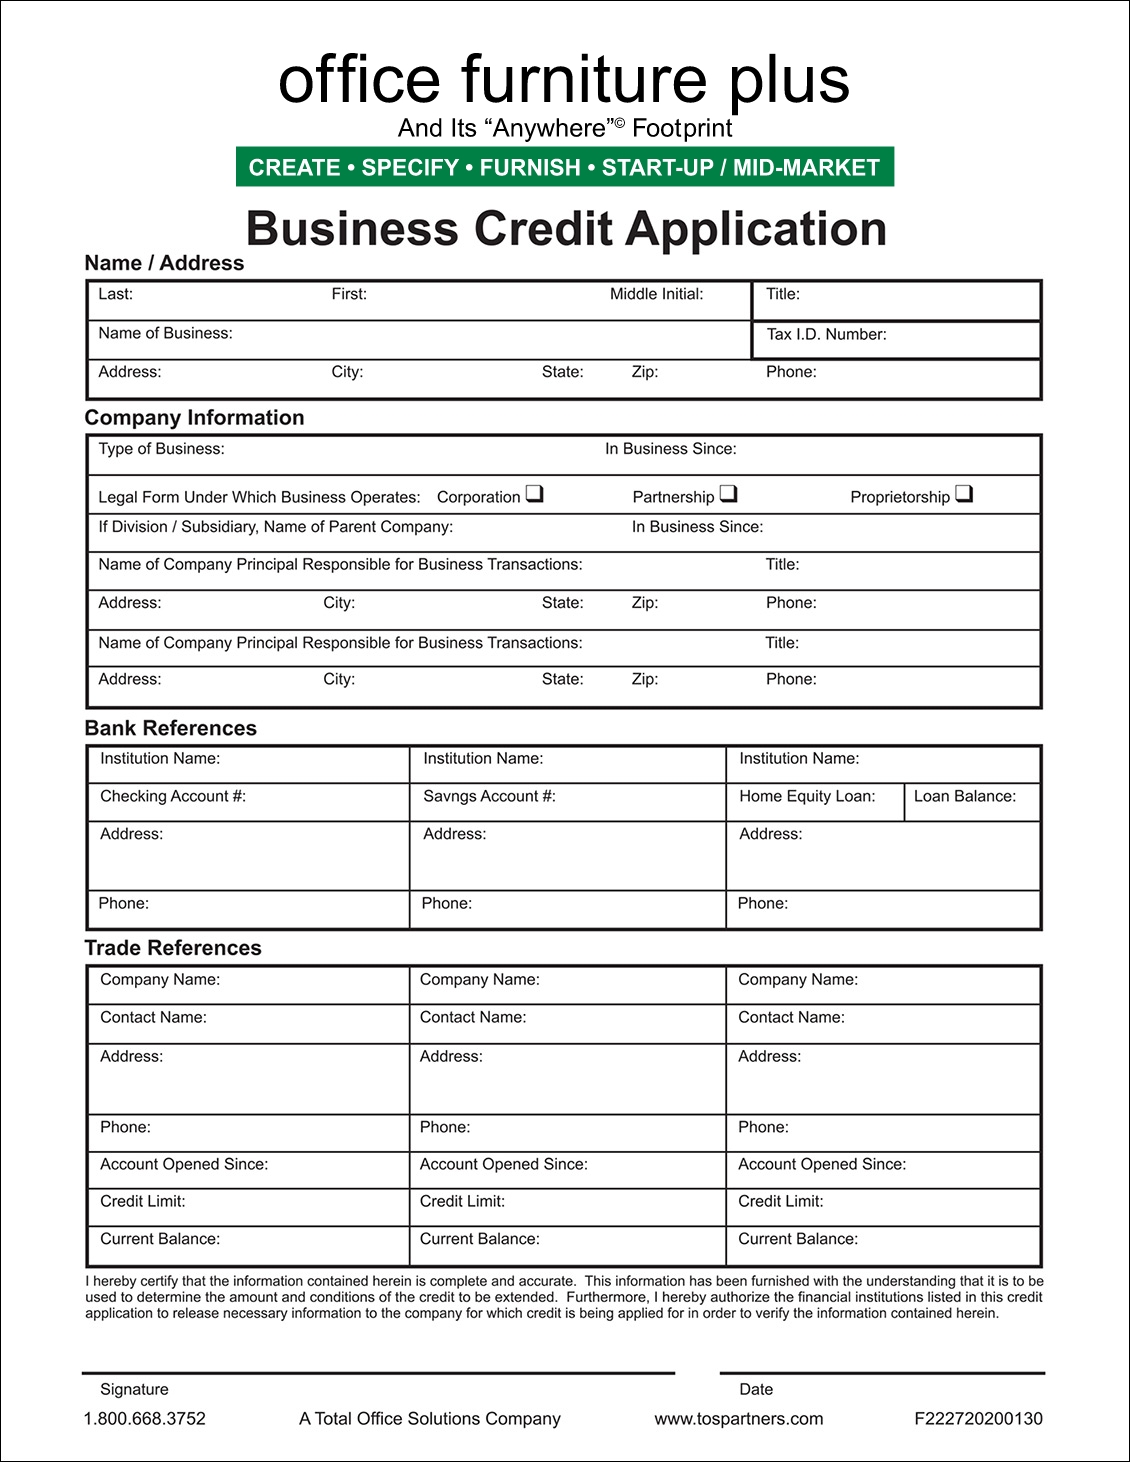 OFP-Business-Credit-Application